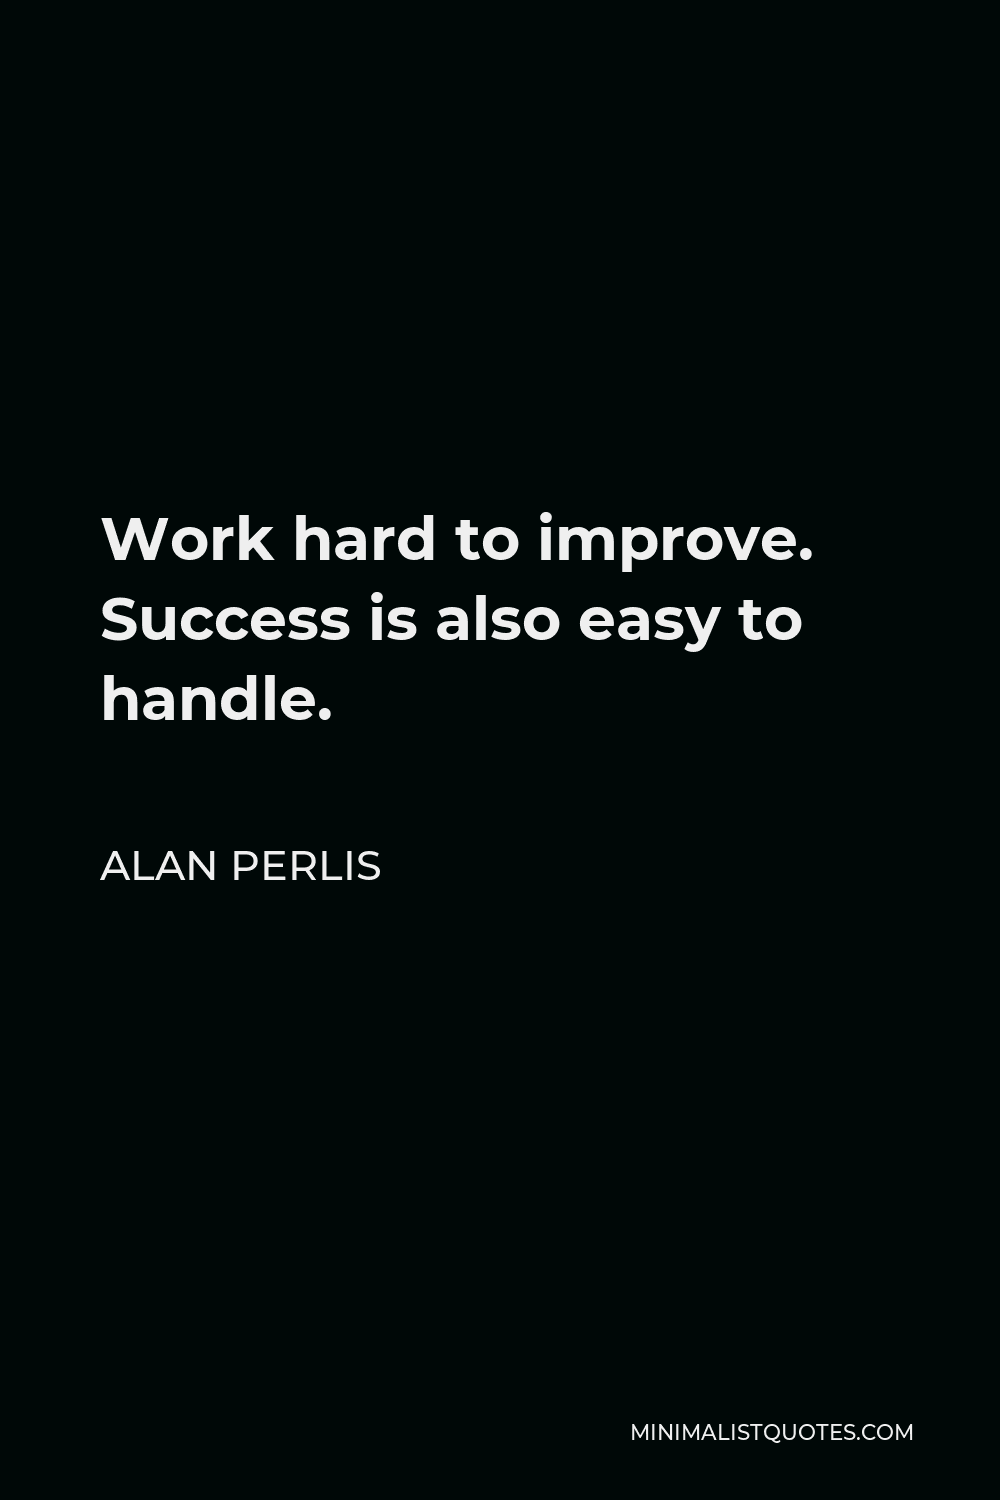 Alan Perlis Quote - Work hard to improve. Success is also easy to handle.